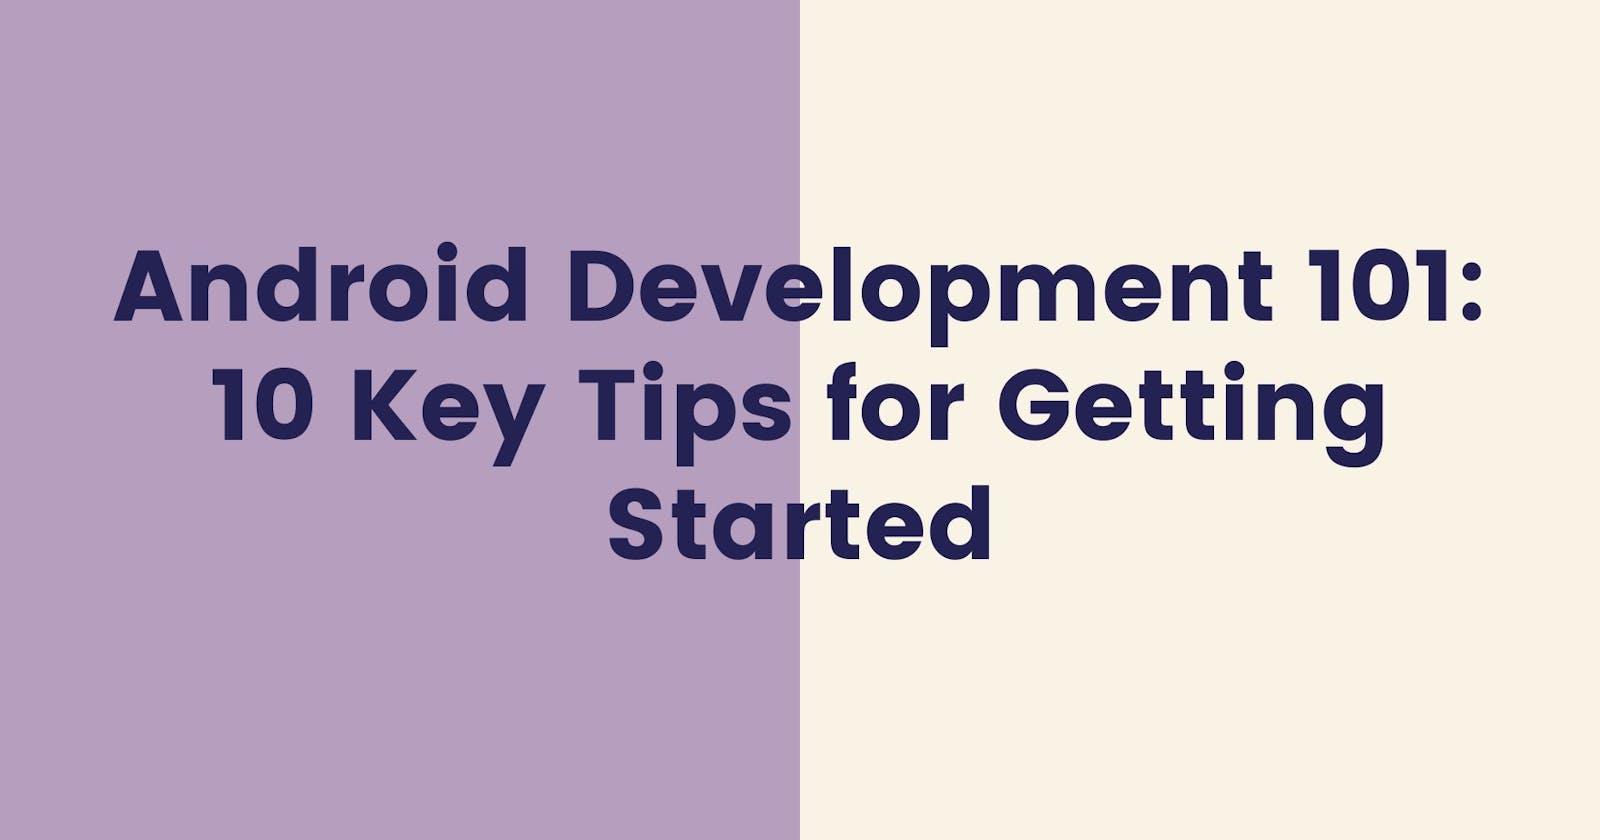 Android Development 101: 10 Key Tips for Getting Started with Android Development